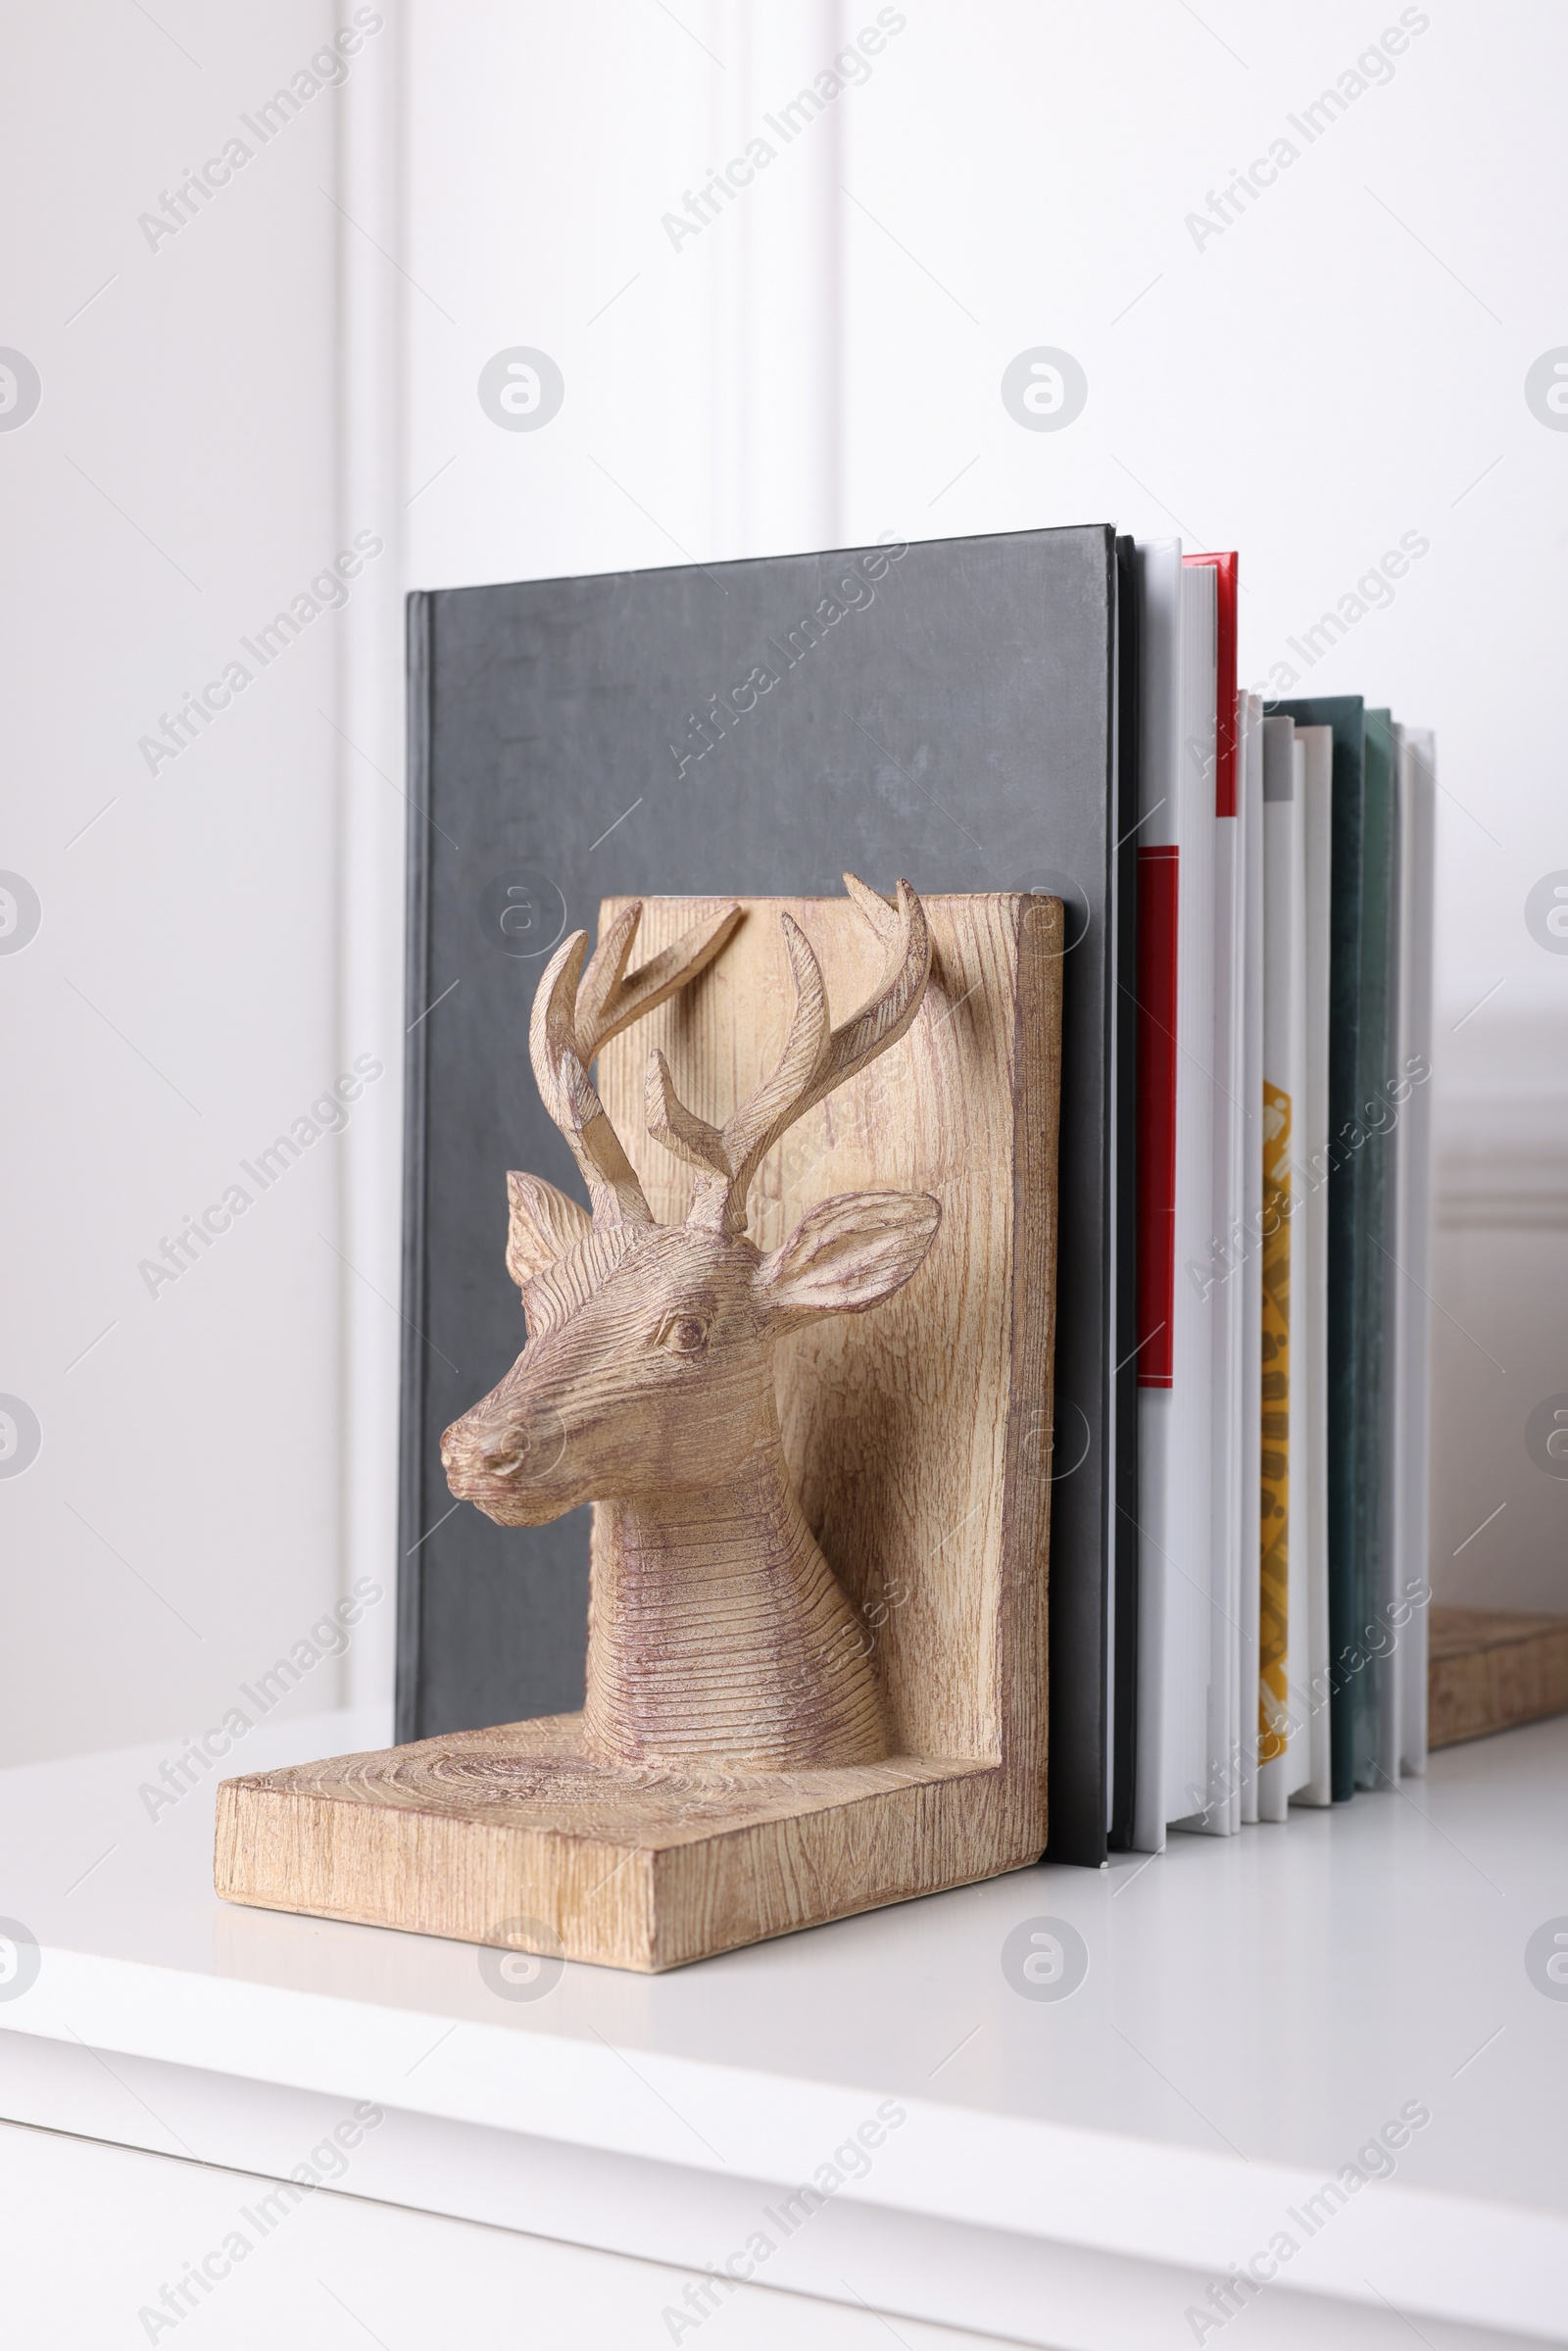 Photo of Wooden deer shaped bookend with books on table indoors